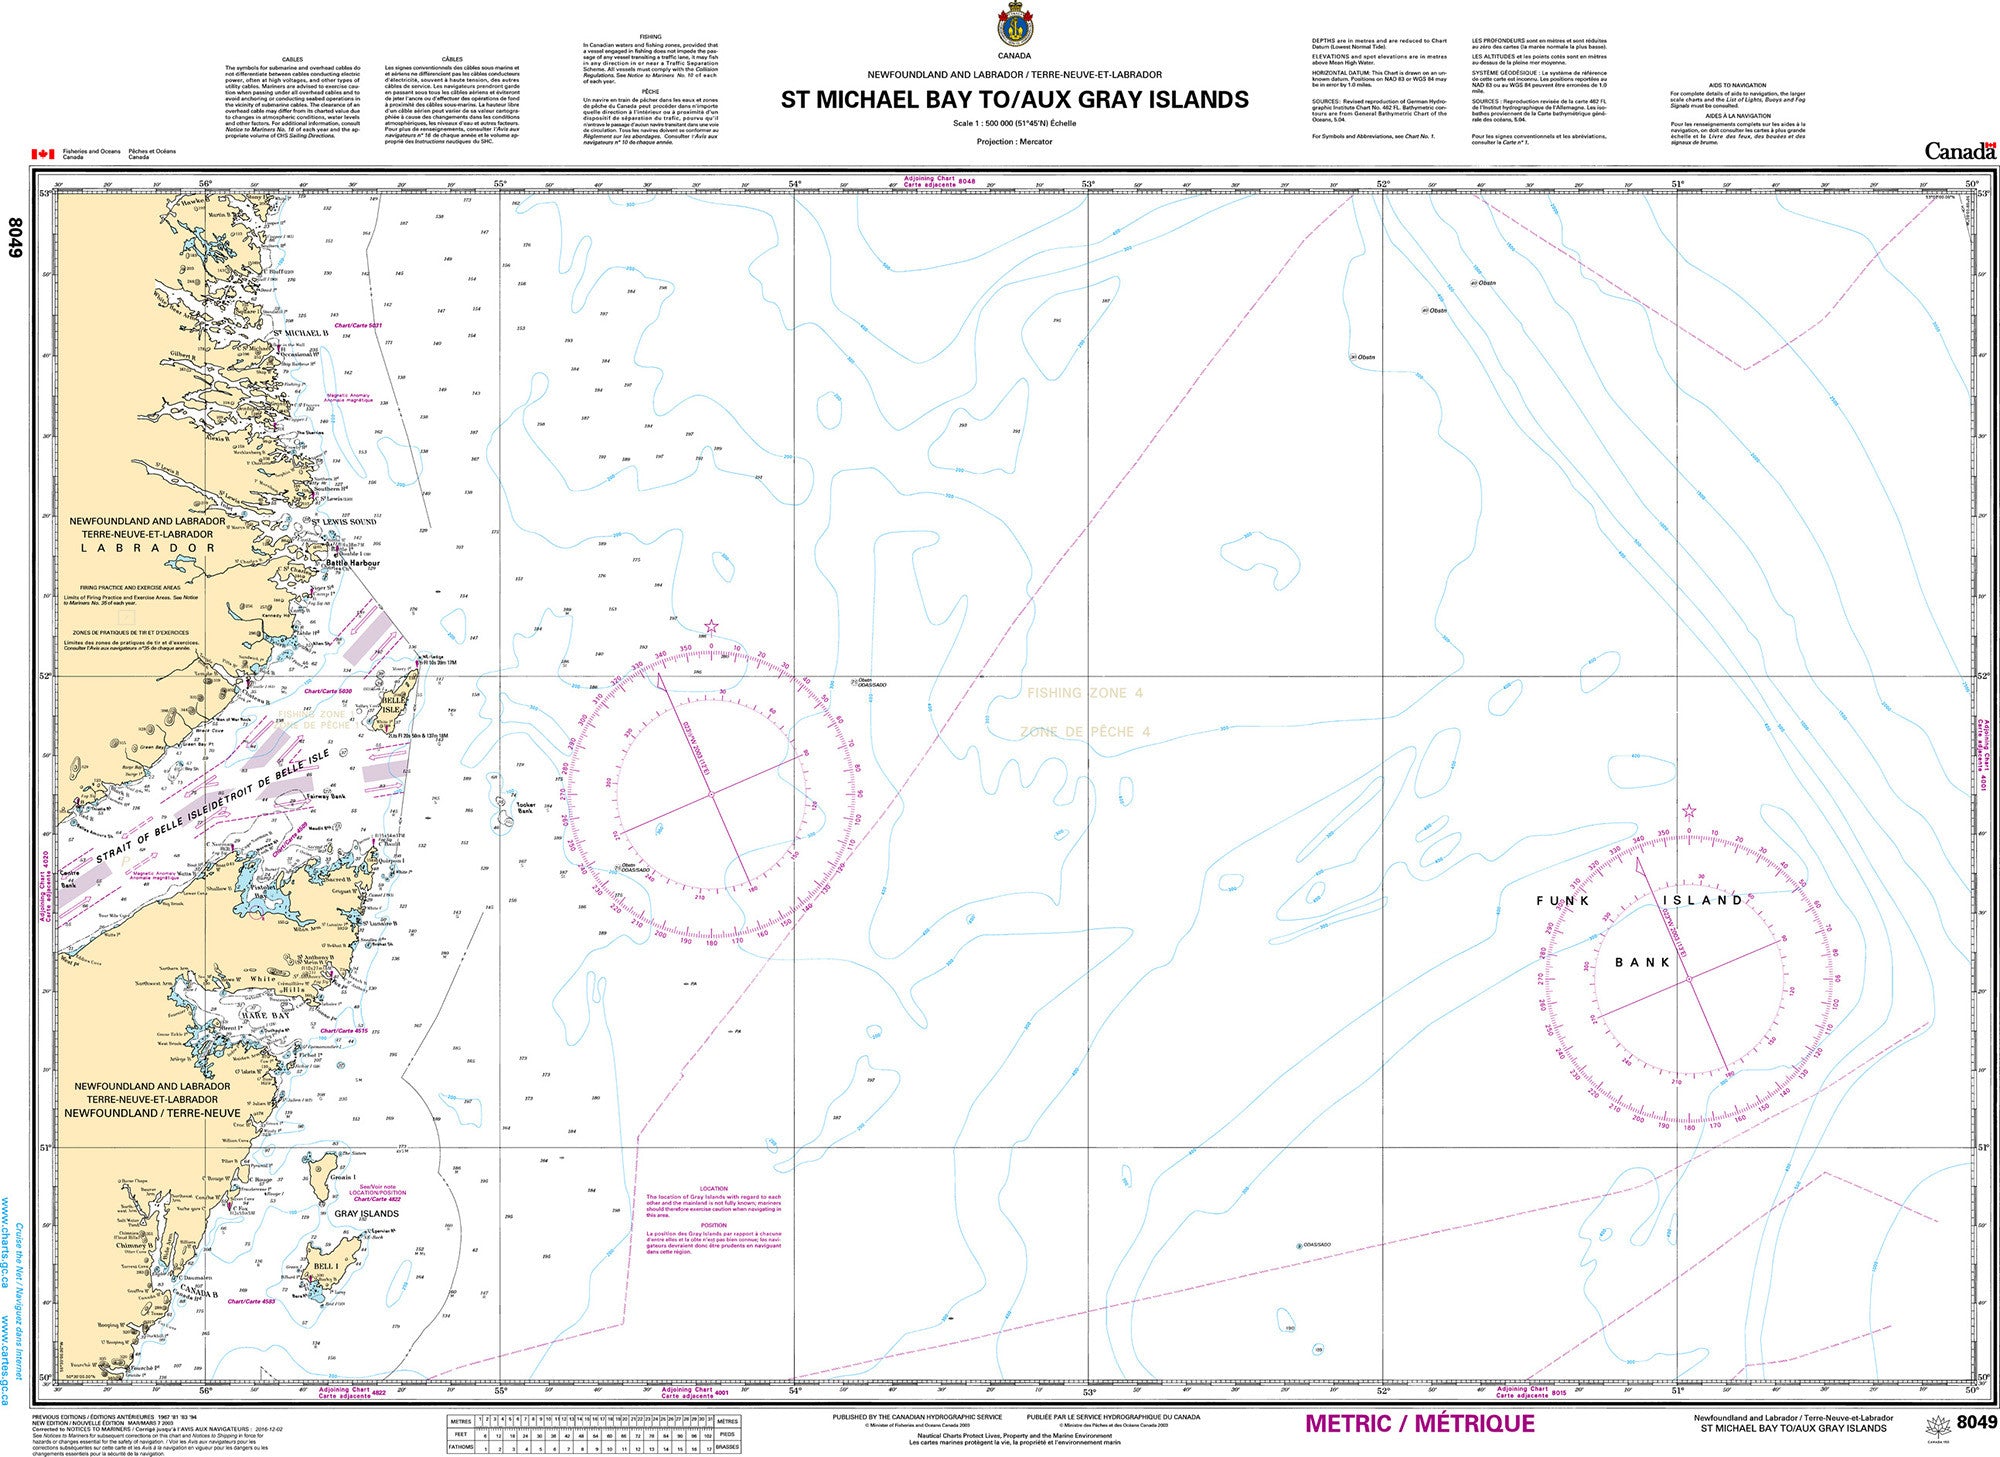 Canadian Hydrographic Service Nautical Chart CHS8049: St. Michael Bay to/aux Gray Islands